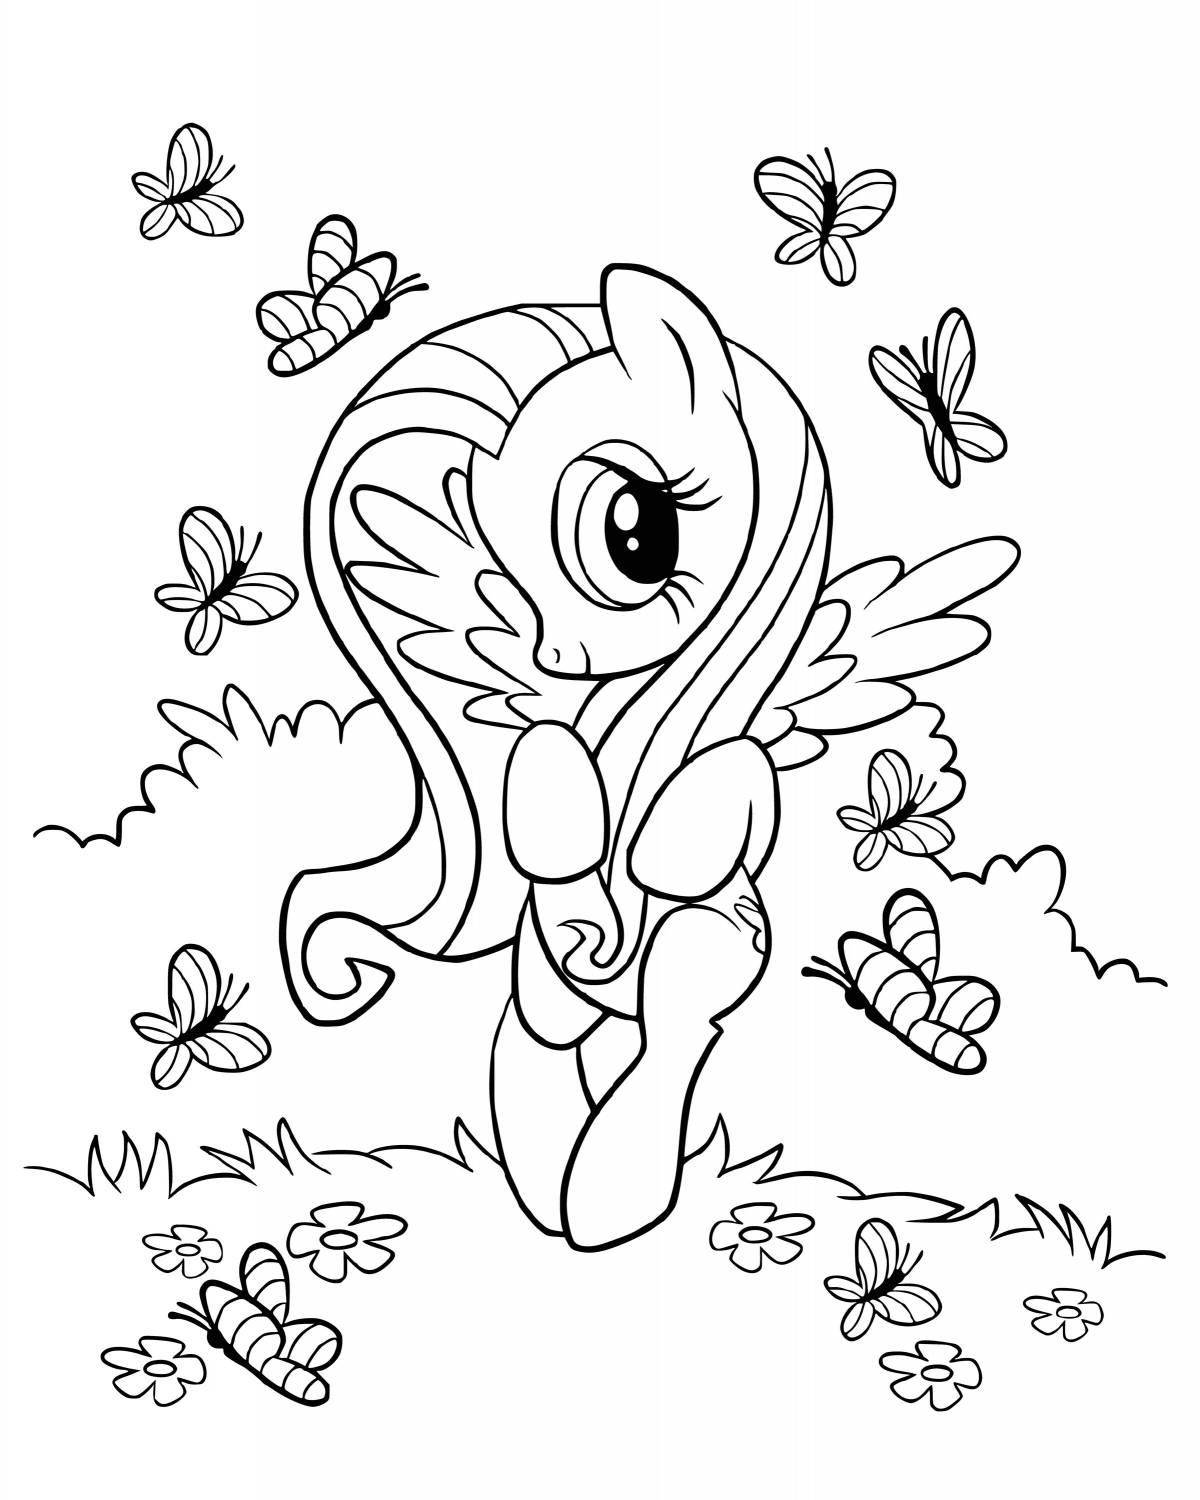 Watershine pony fairy coloring page